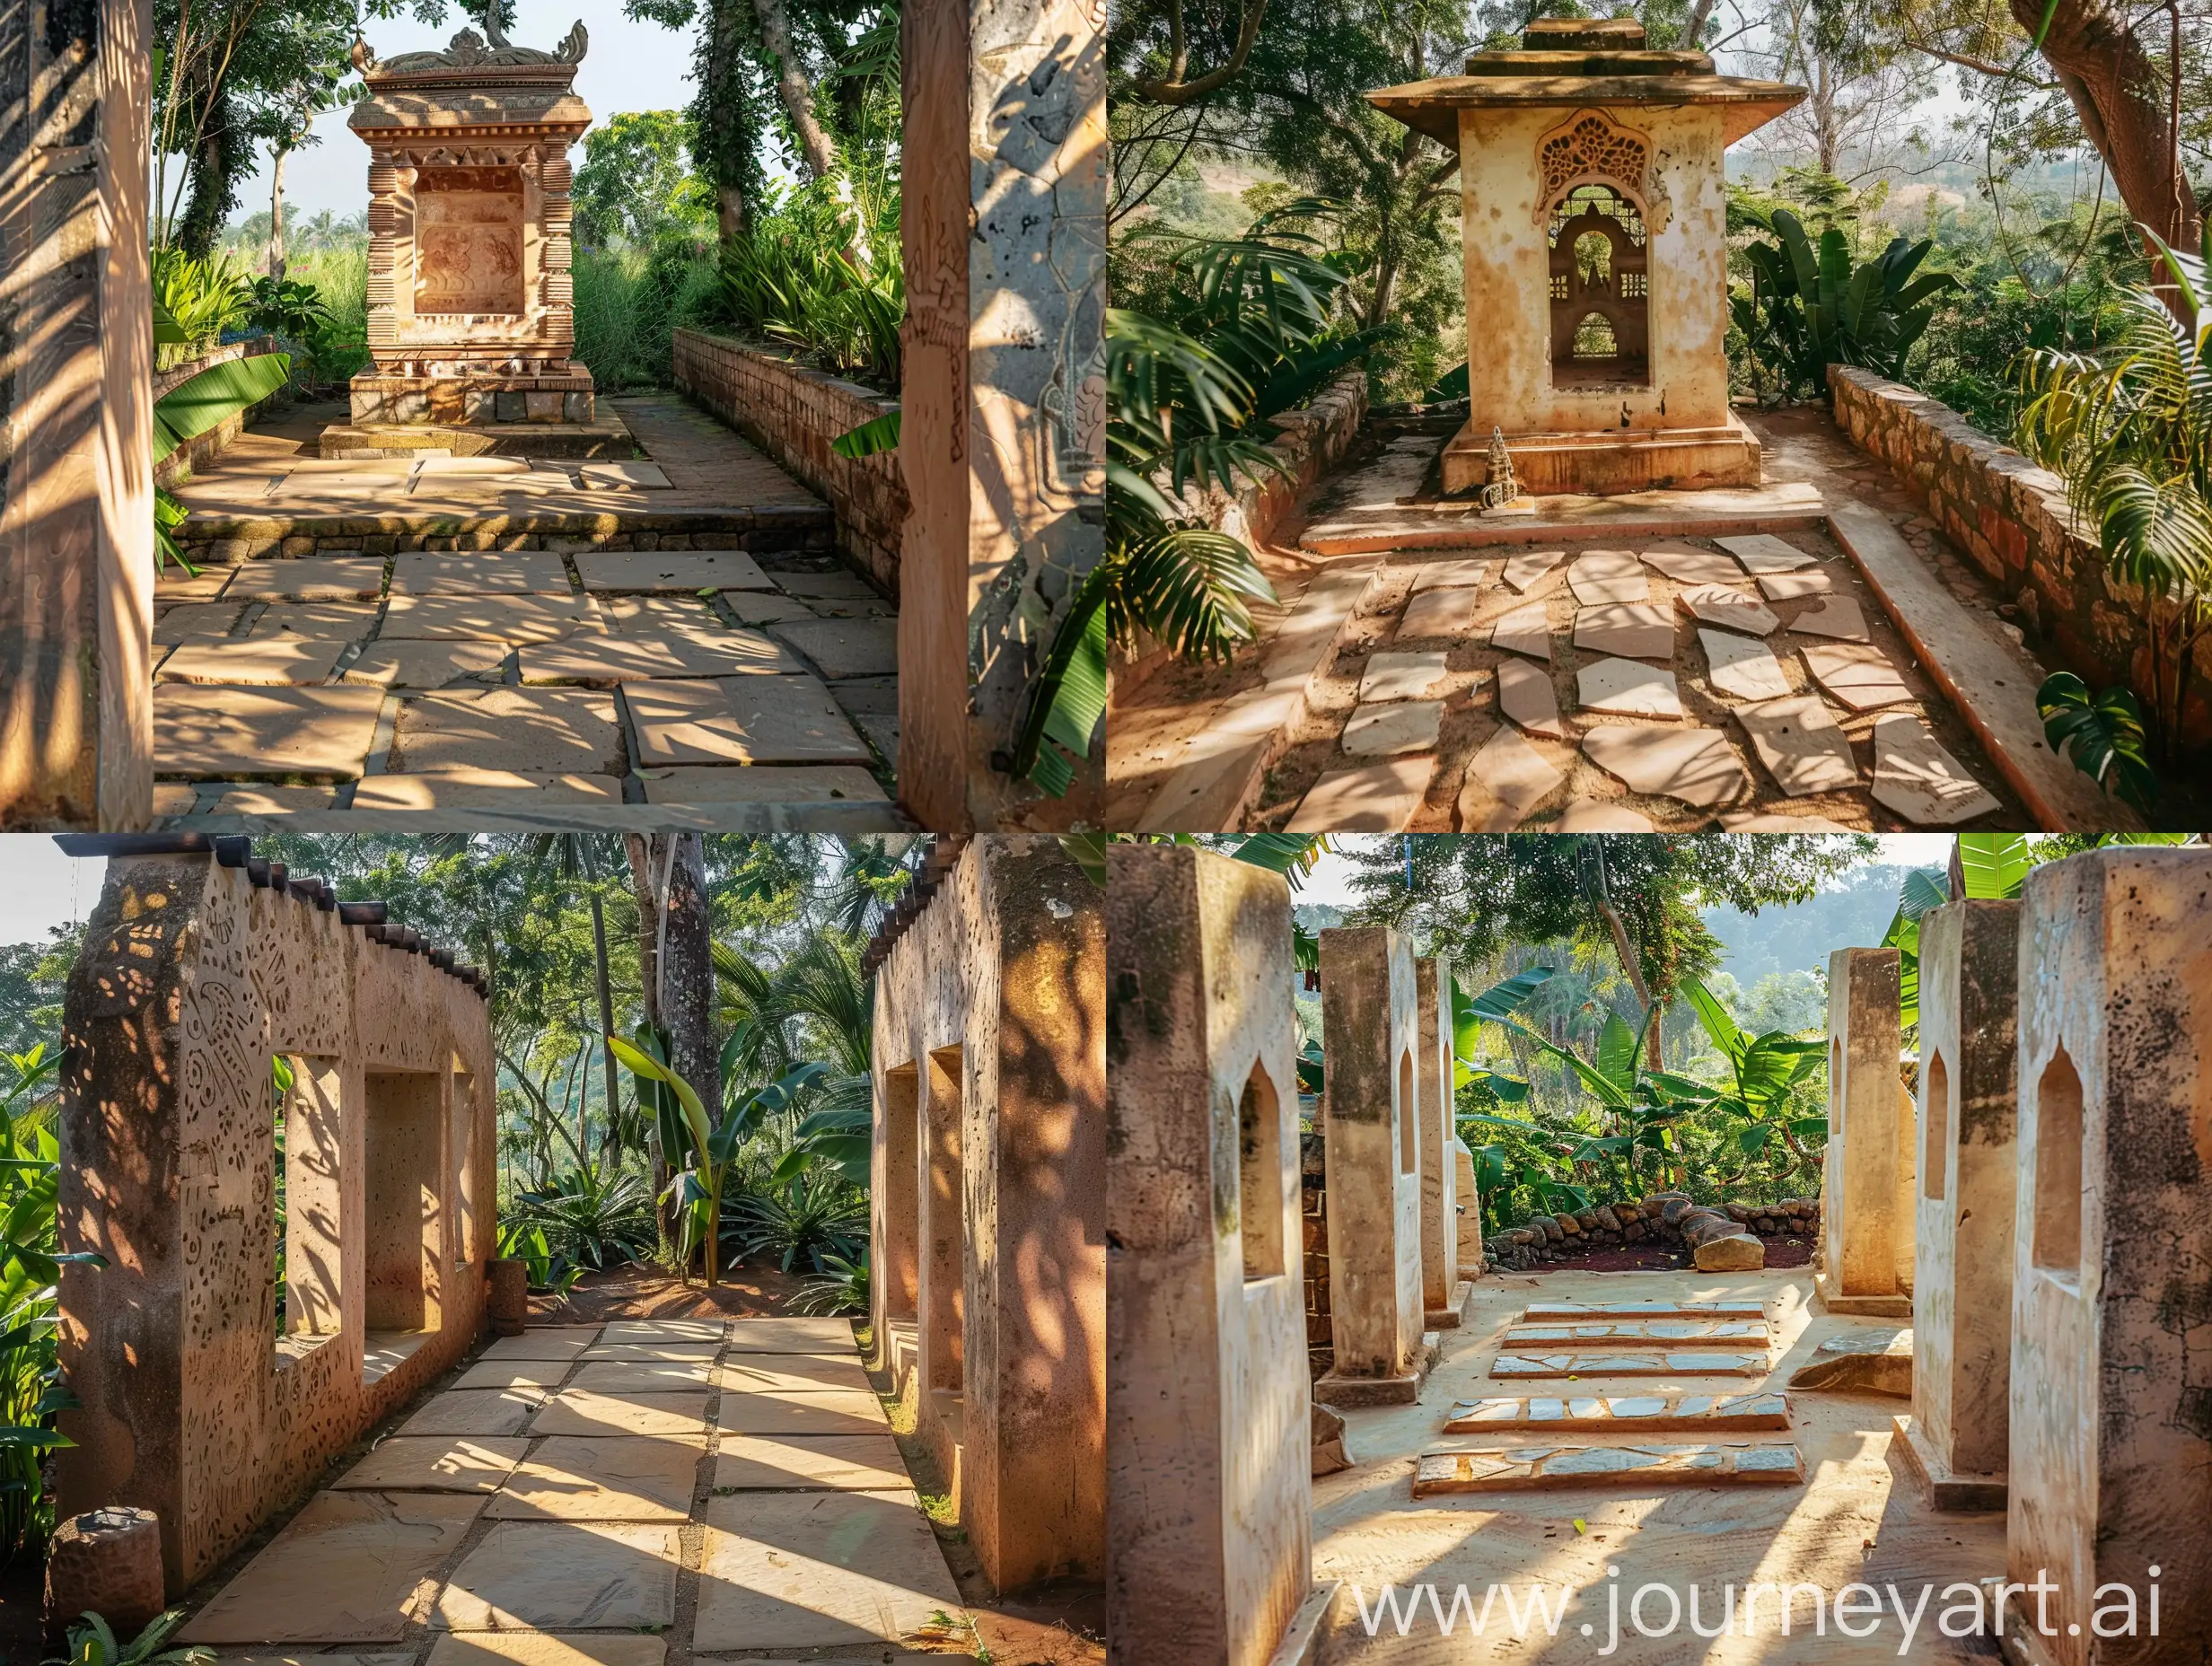 a dainty shrine made with walls of lime plaster and laterite stone. the passage around the shrine has natural stone slabs and a lot of lush landscape in the background. The sun casts shadows on the shrine as light escapes the trees and plants.